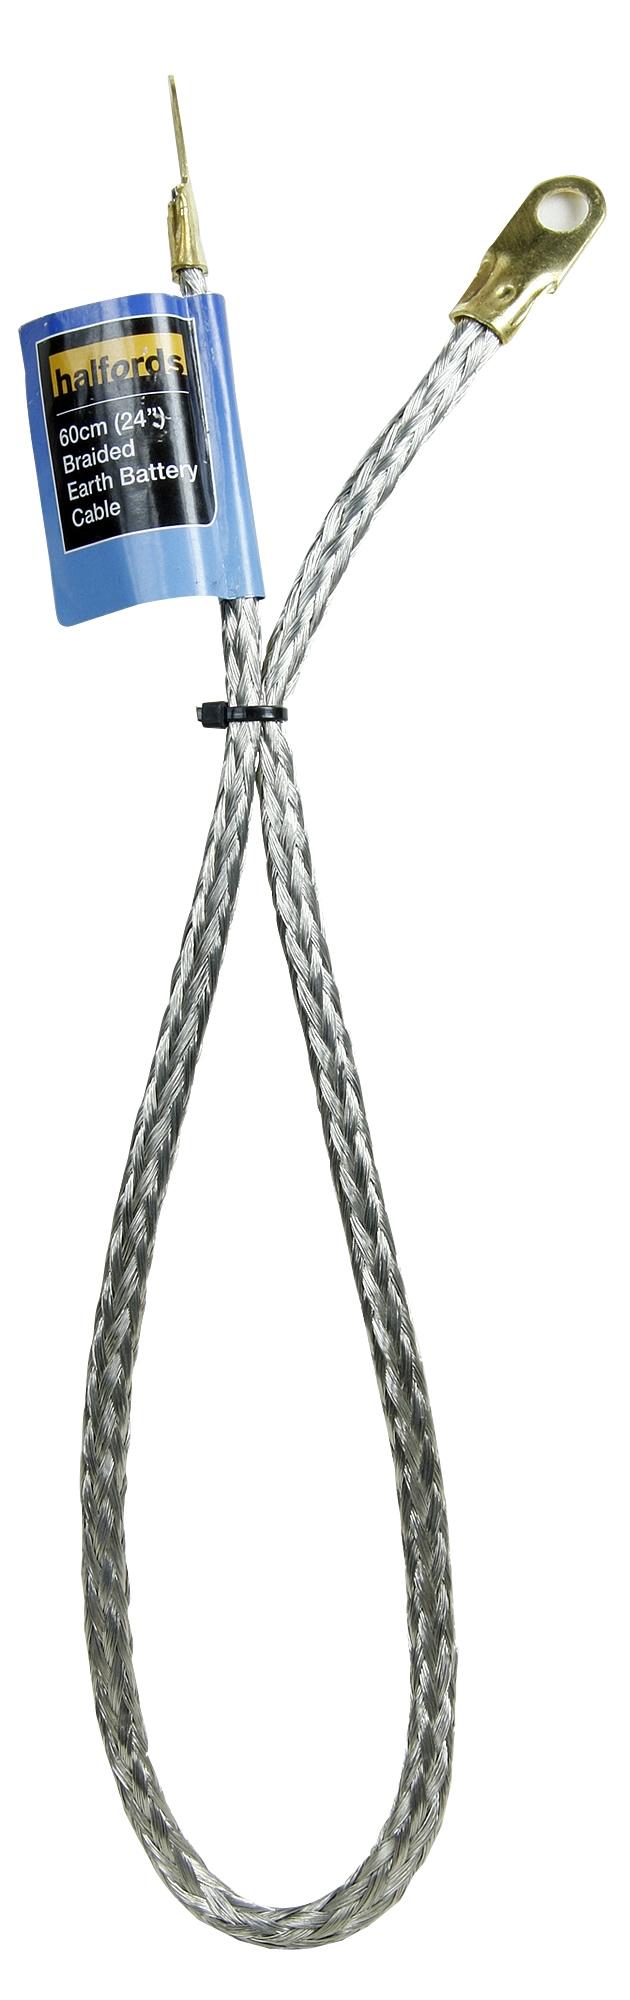 Halfords Braided Earth Battery Cable 60Cm (24 Inch)